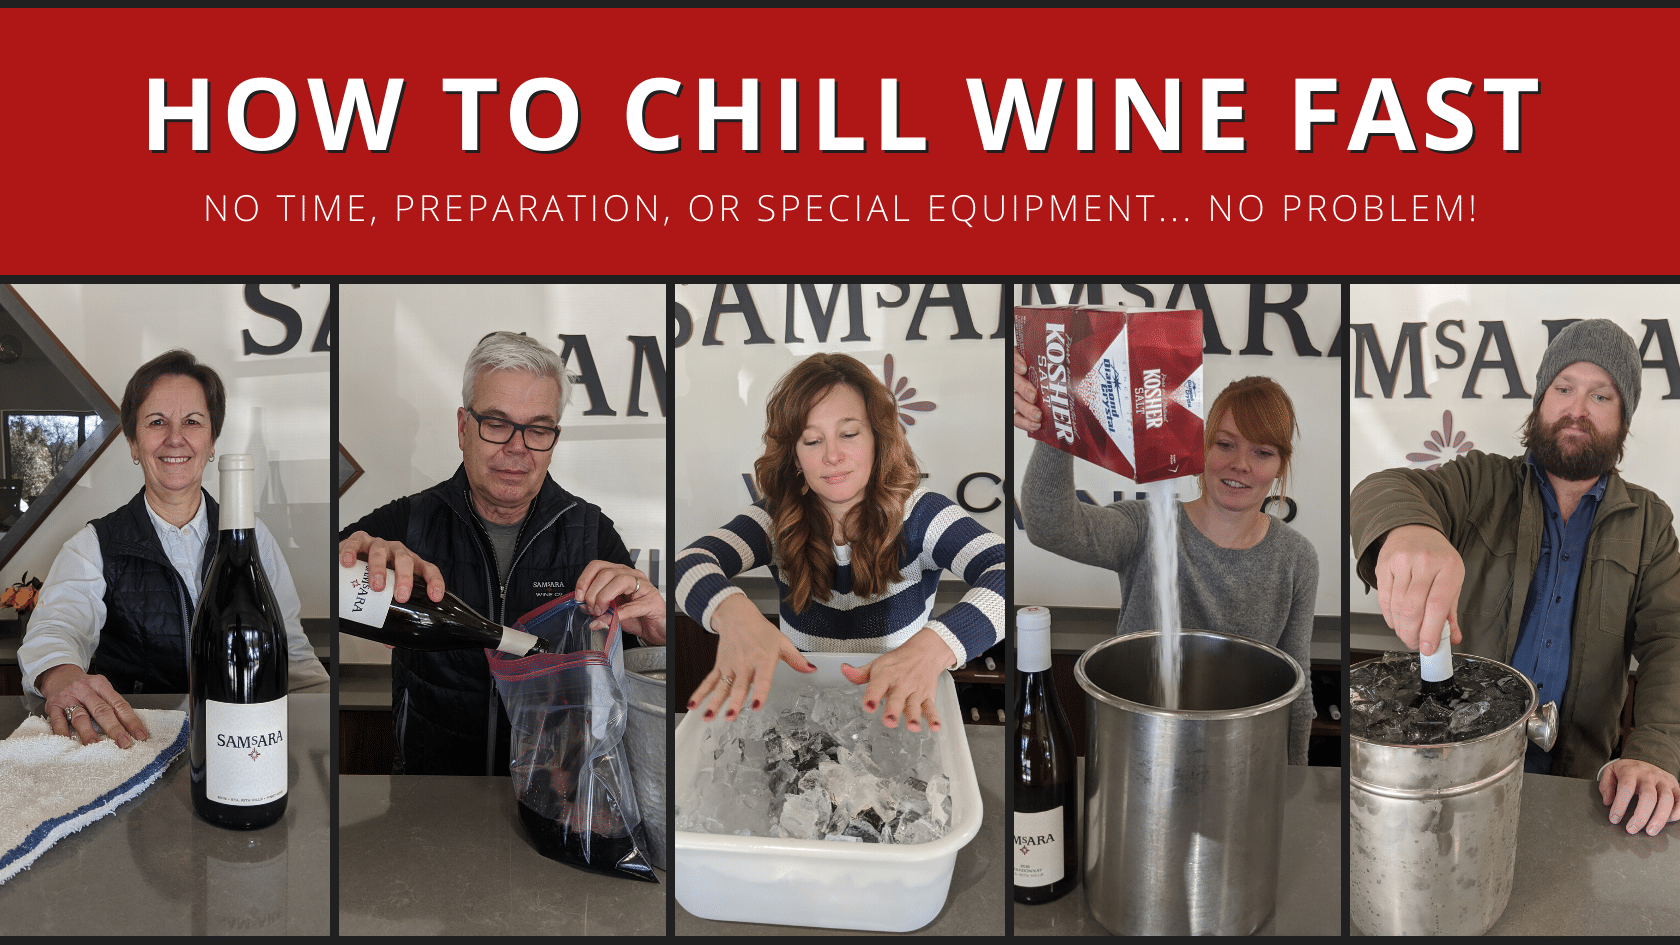 https://www.samsarawine.com/wp-content/uploads/2020/02/HOW-TO-CHILL-WINE-FAST.png